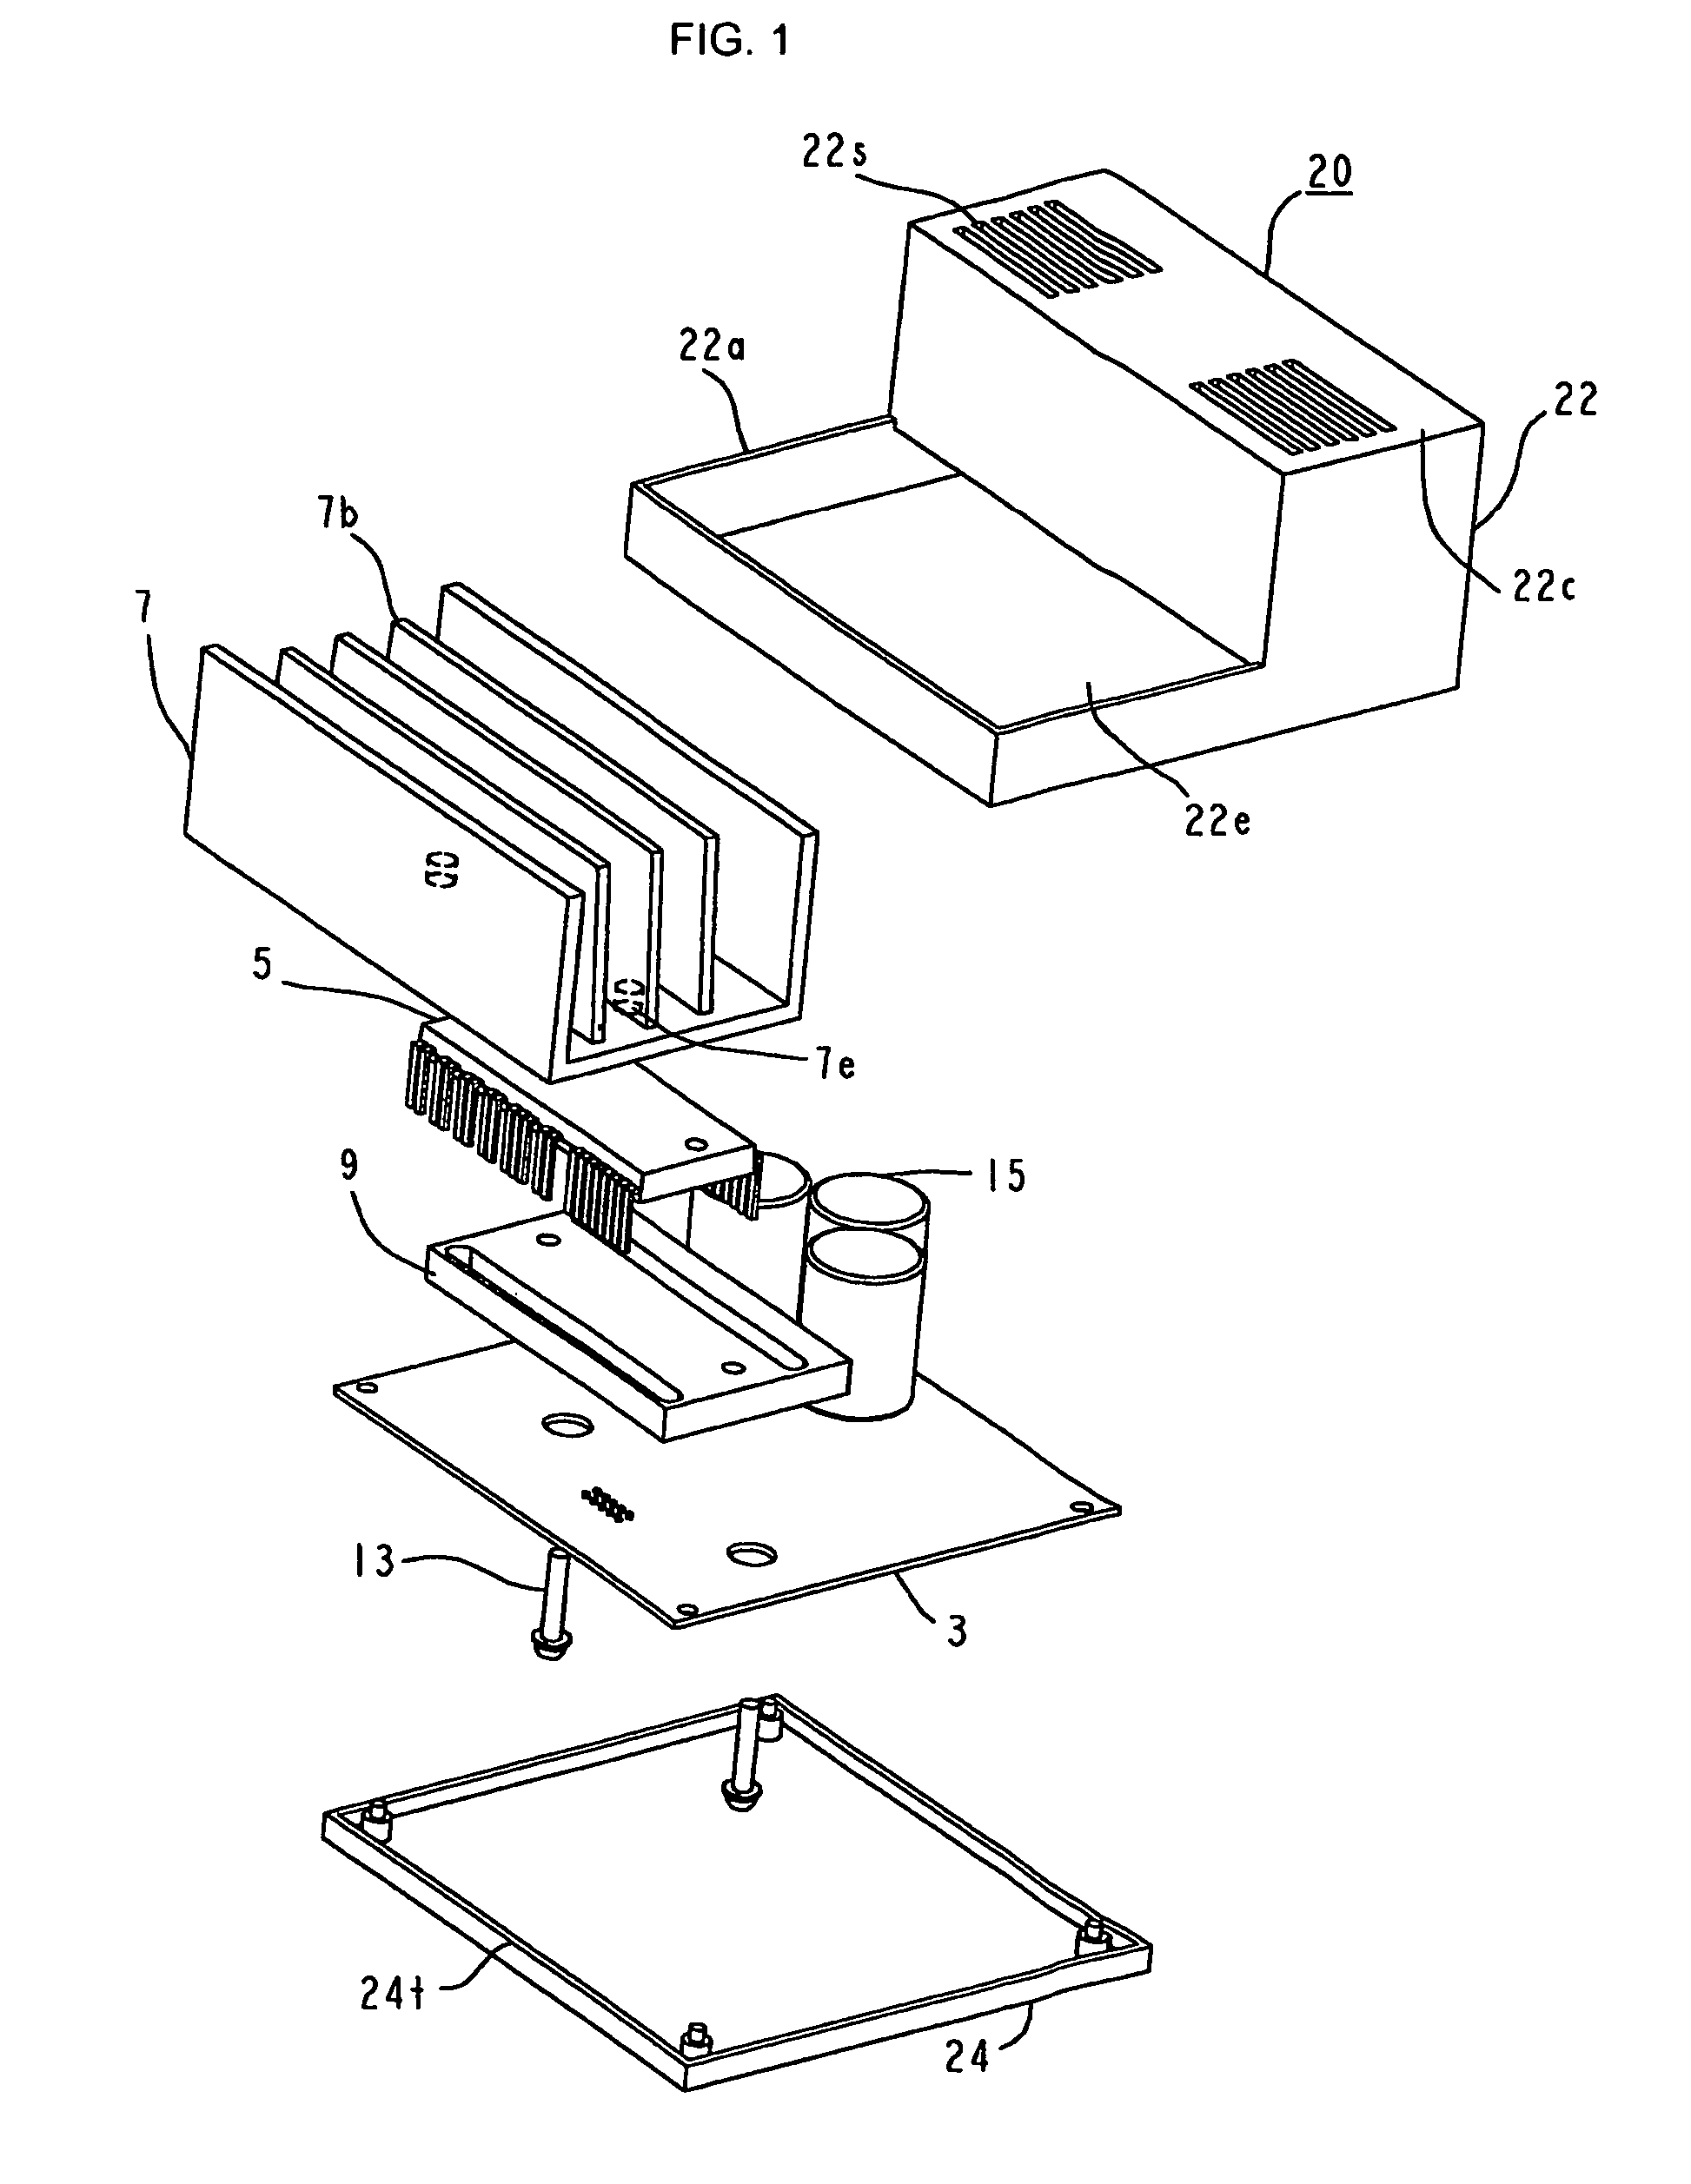 Modular heat-radiation structure and controller including the structure